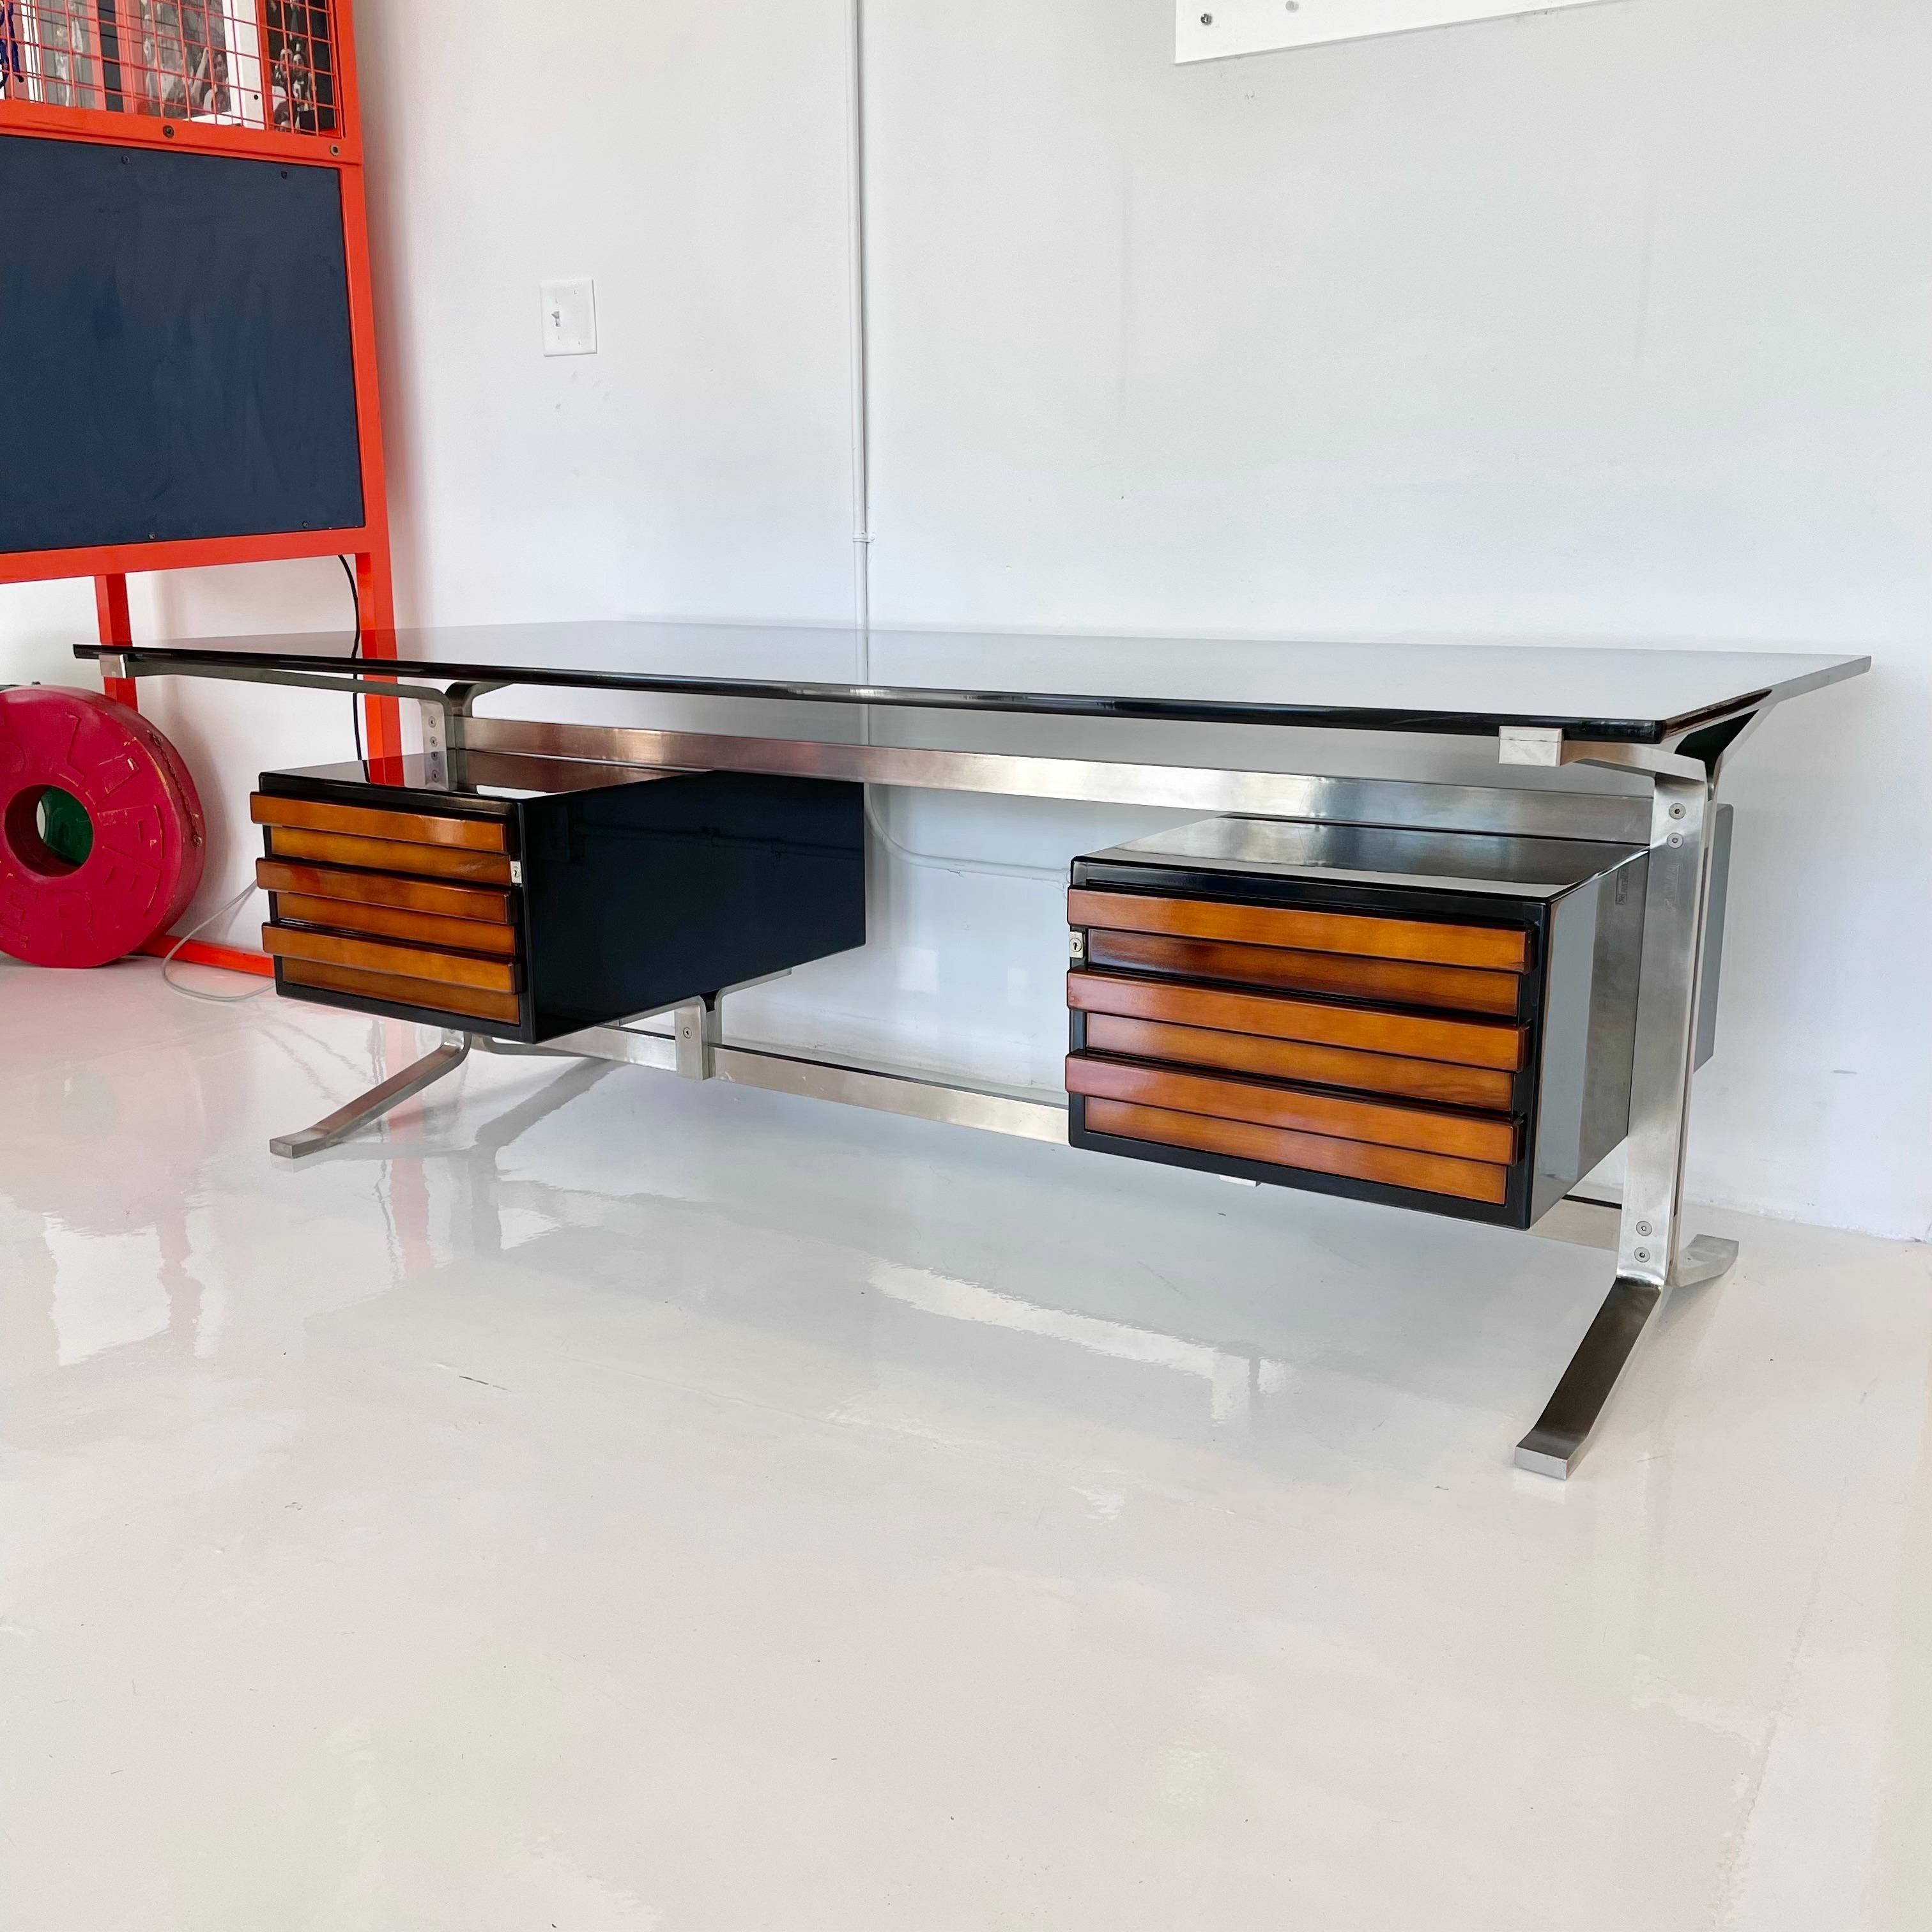 Stunning Formanova desk by Gianni Moscatelli. Prominent 3/4 inch smoked glass desk top floats on top of newly polished stainless steel base. Three pull-out drawers on either side are in the original caramel wood and are encased by a beautiful ebony